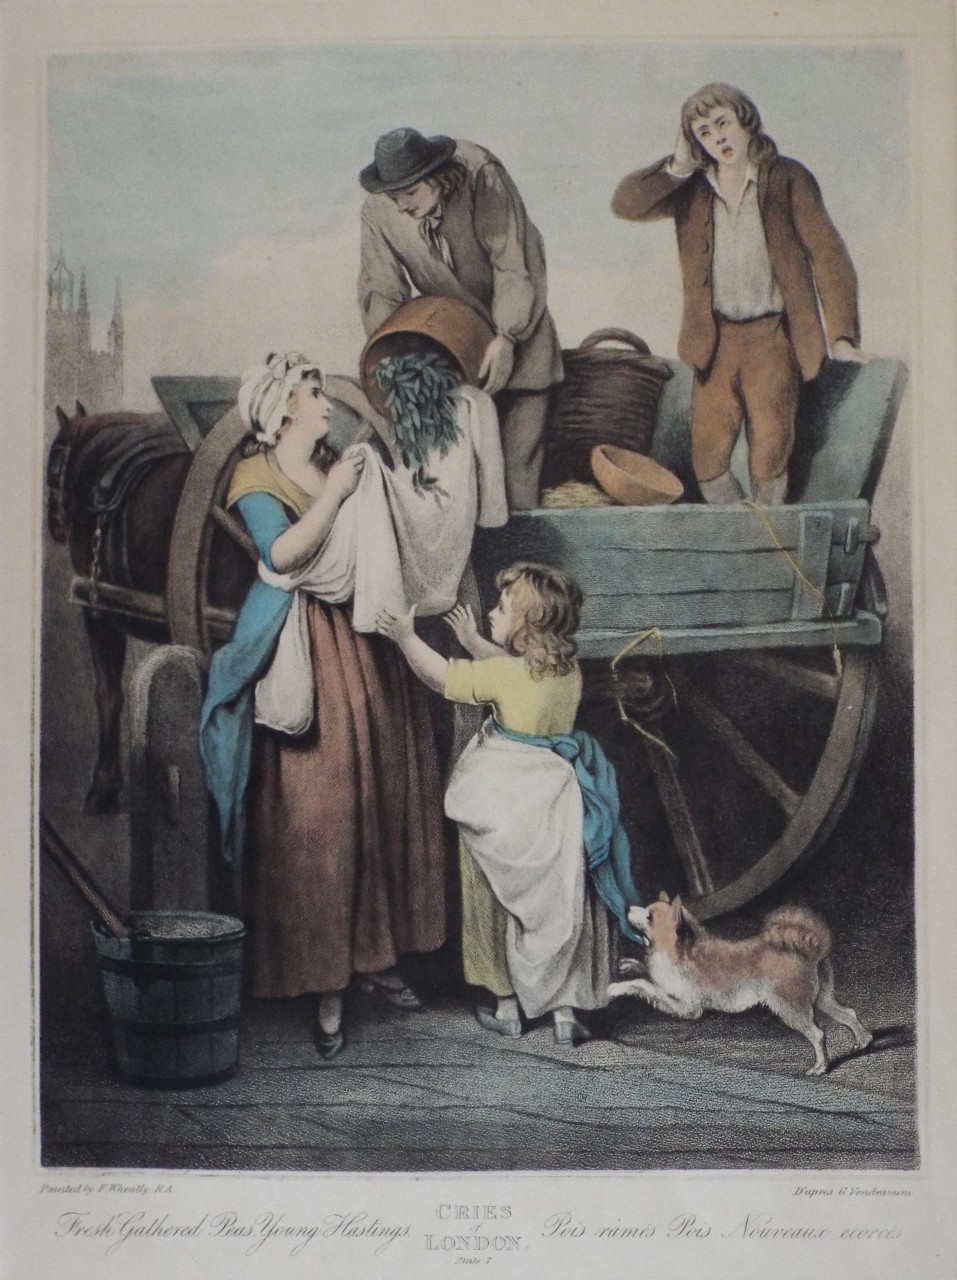 Lithograph - Cries of London Plate 7: Fresh Gathered Peas Young Hastings.
Pois rames Pois Nouveaux ecorees. - Vendramini